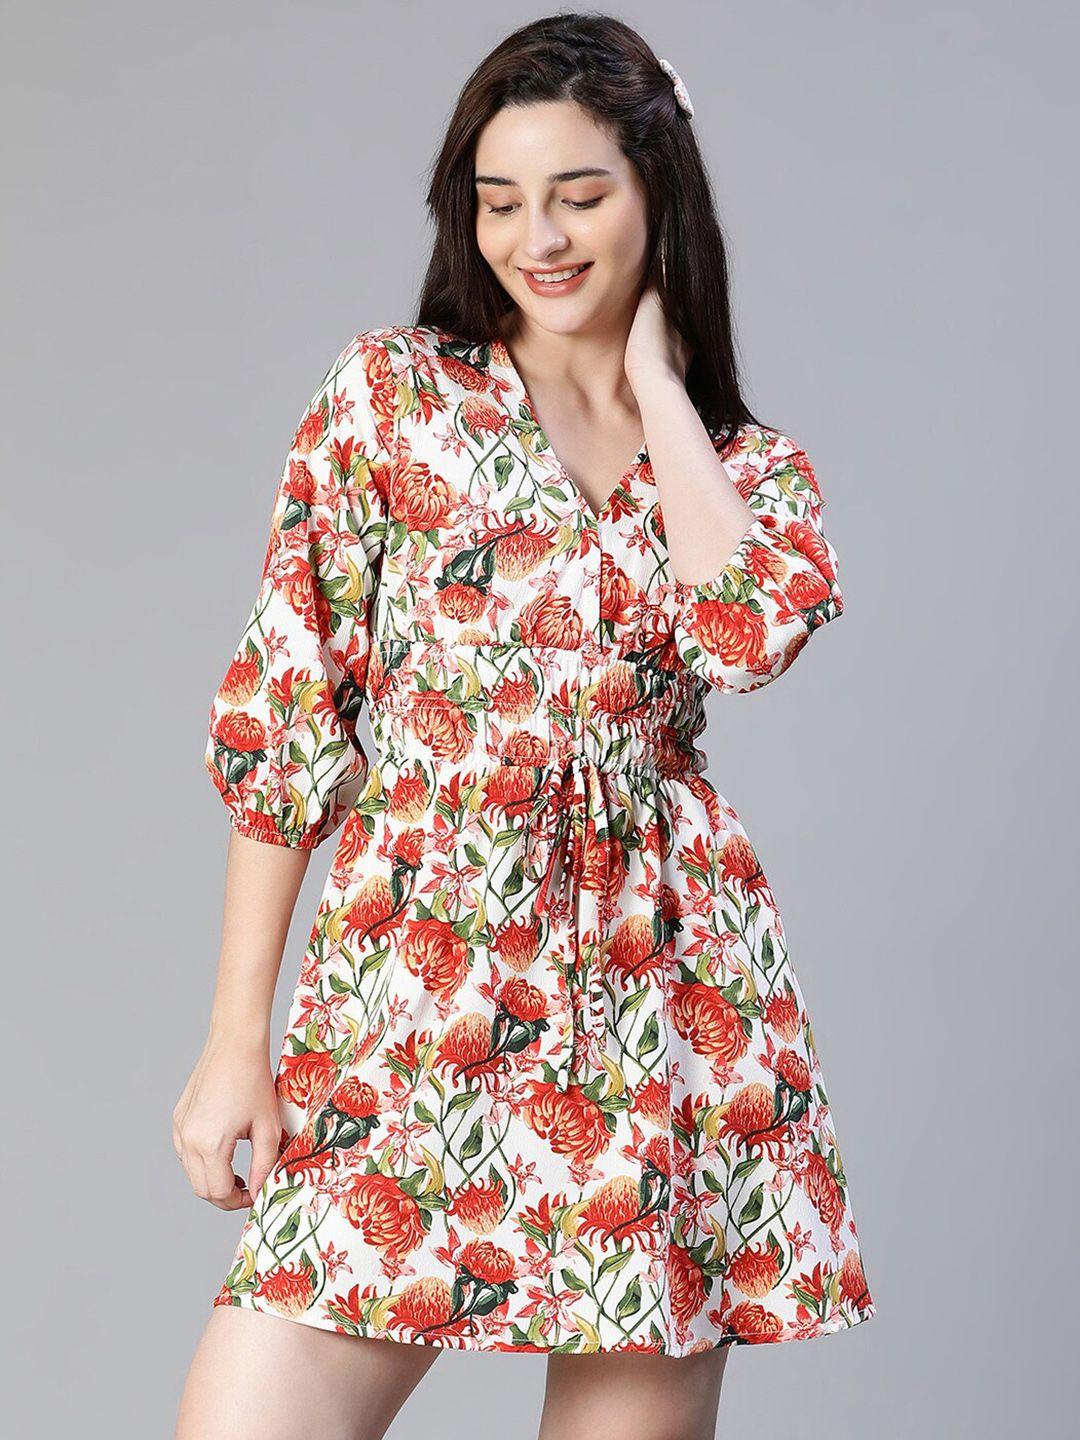 oxolloxo floral printed v-neck puff sleeves fit & flare mini dress